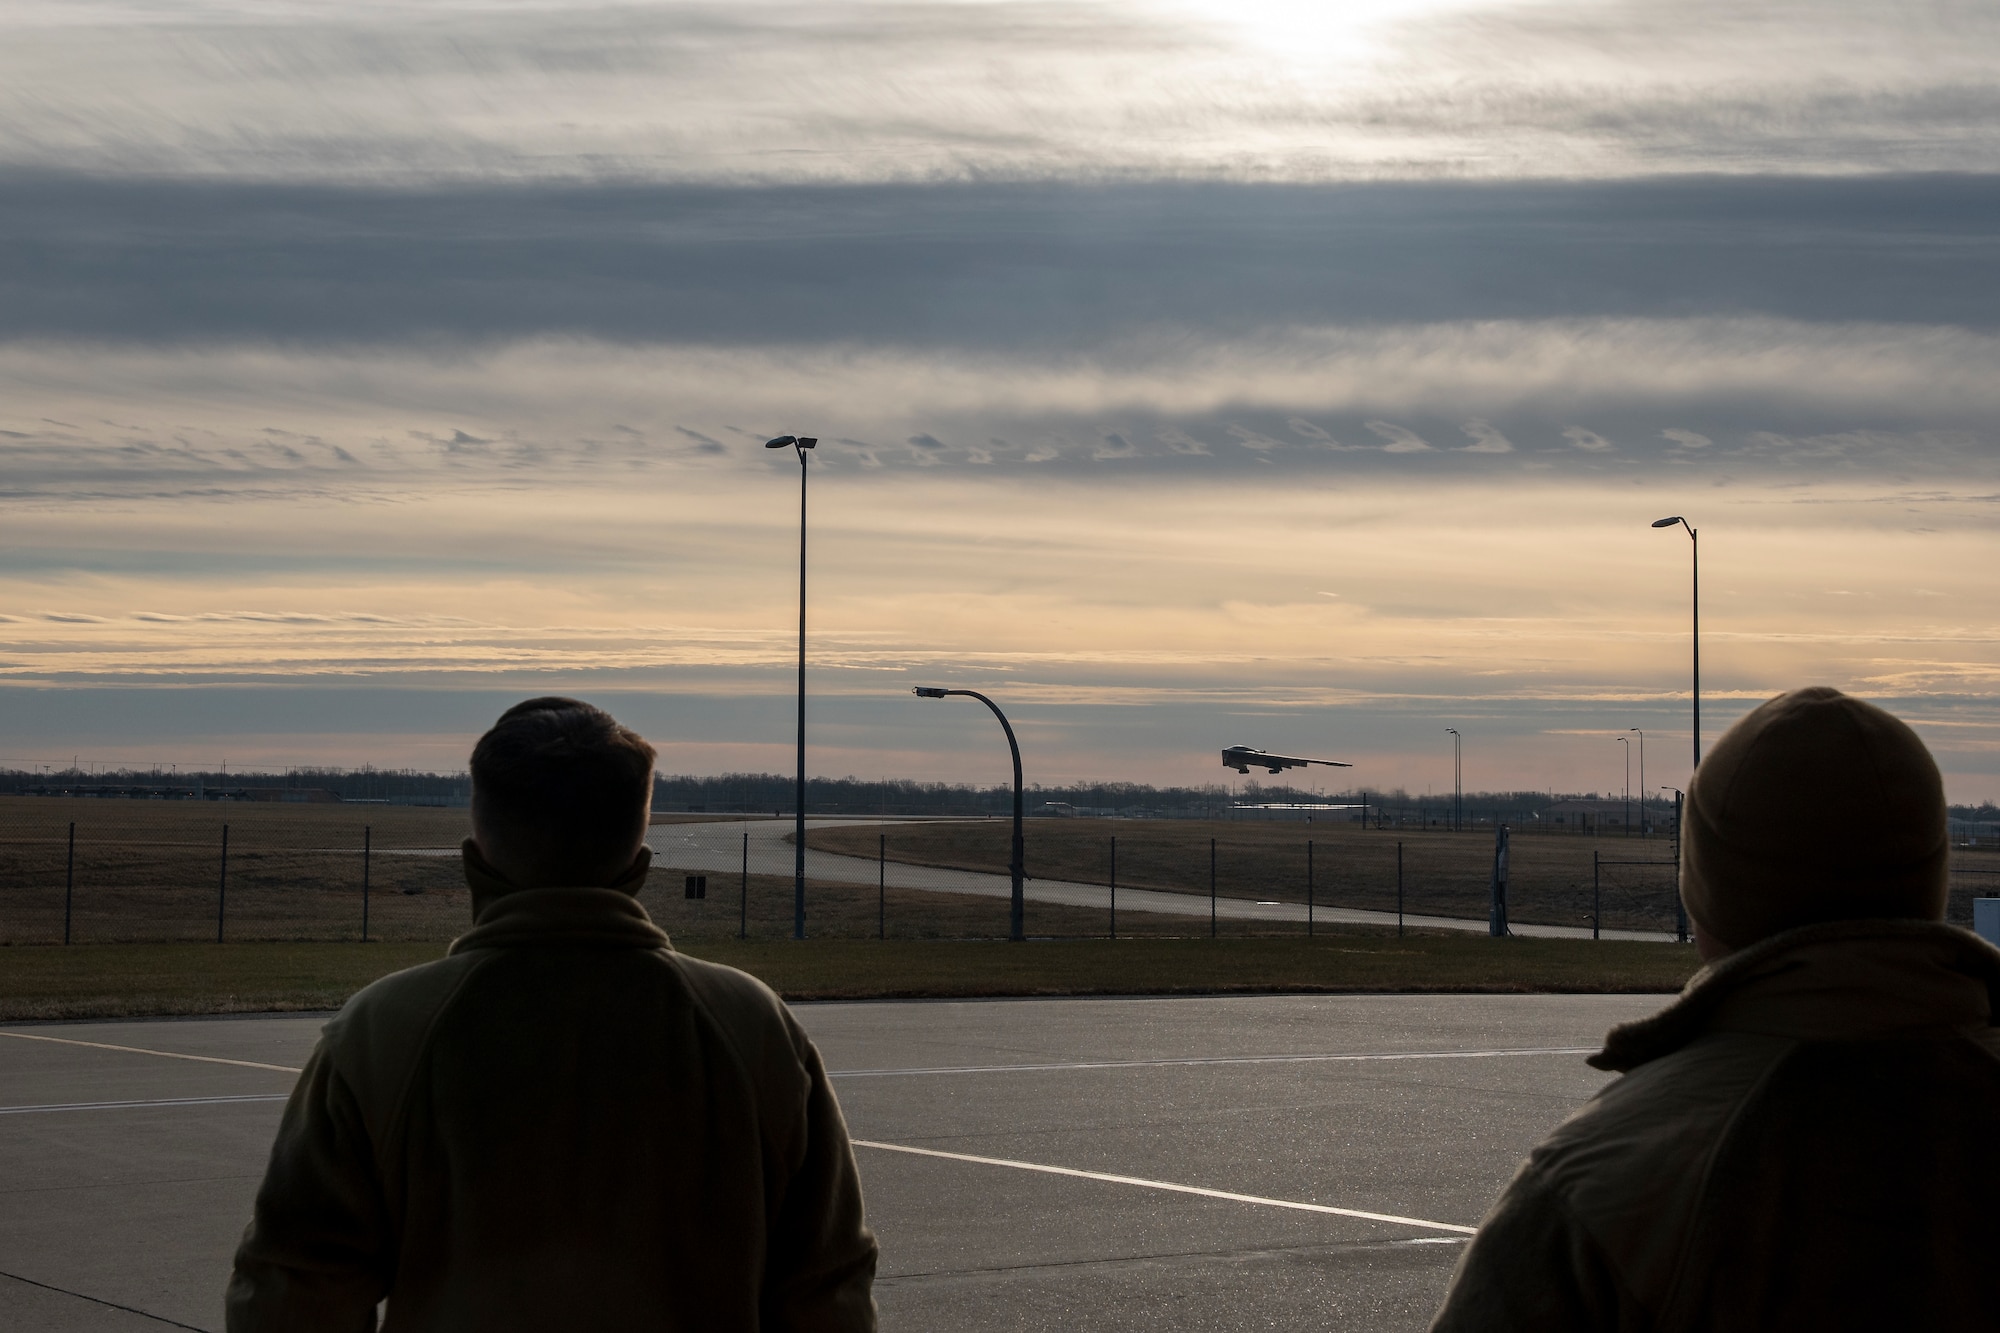 Master Sgt. Joshua Upton takes off in a B-2 Spirit stealth bomber at Whiteman Air Force Base, Missouri, Jan 9, 2022, as 131st Bomb Wing Airmen look on.  Upton, the wing's Maintainer of the Year, earned an inventive ride in the aircraft due to his exemplary work throughout 2021. (U.S. Air National Guard photo, 131st Bomb Wing Public Affairs)